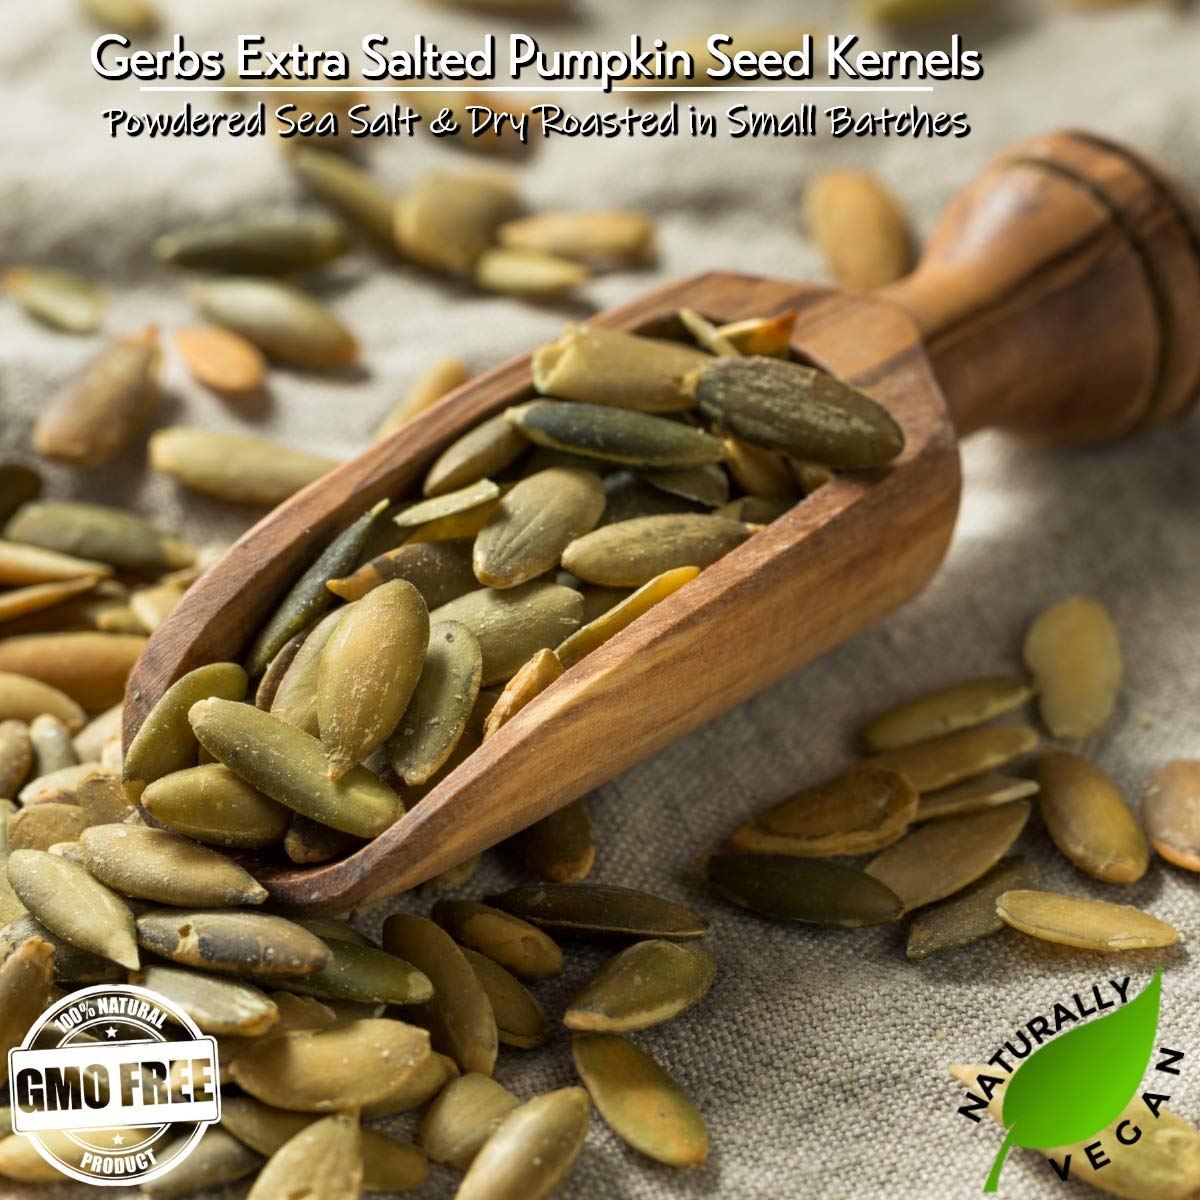 GERBS Extra Sea Salted Pumpkin Seed Kernels 2 LBS|Top 14 Allergy Free Food |Use in salads, yogurt, oatmeal, trail mix|Grown in Canada, packed in US